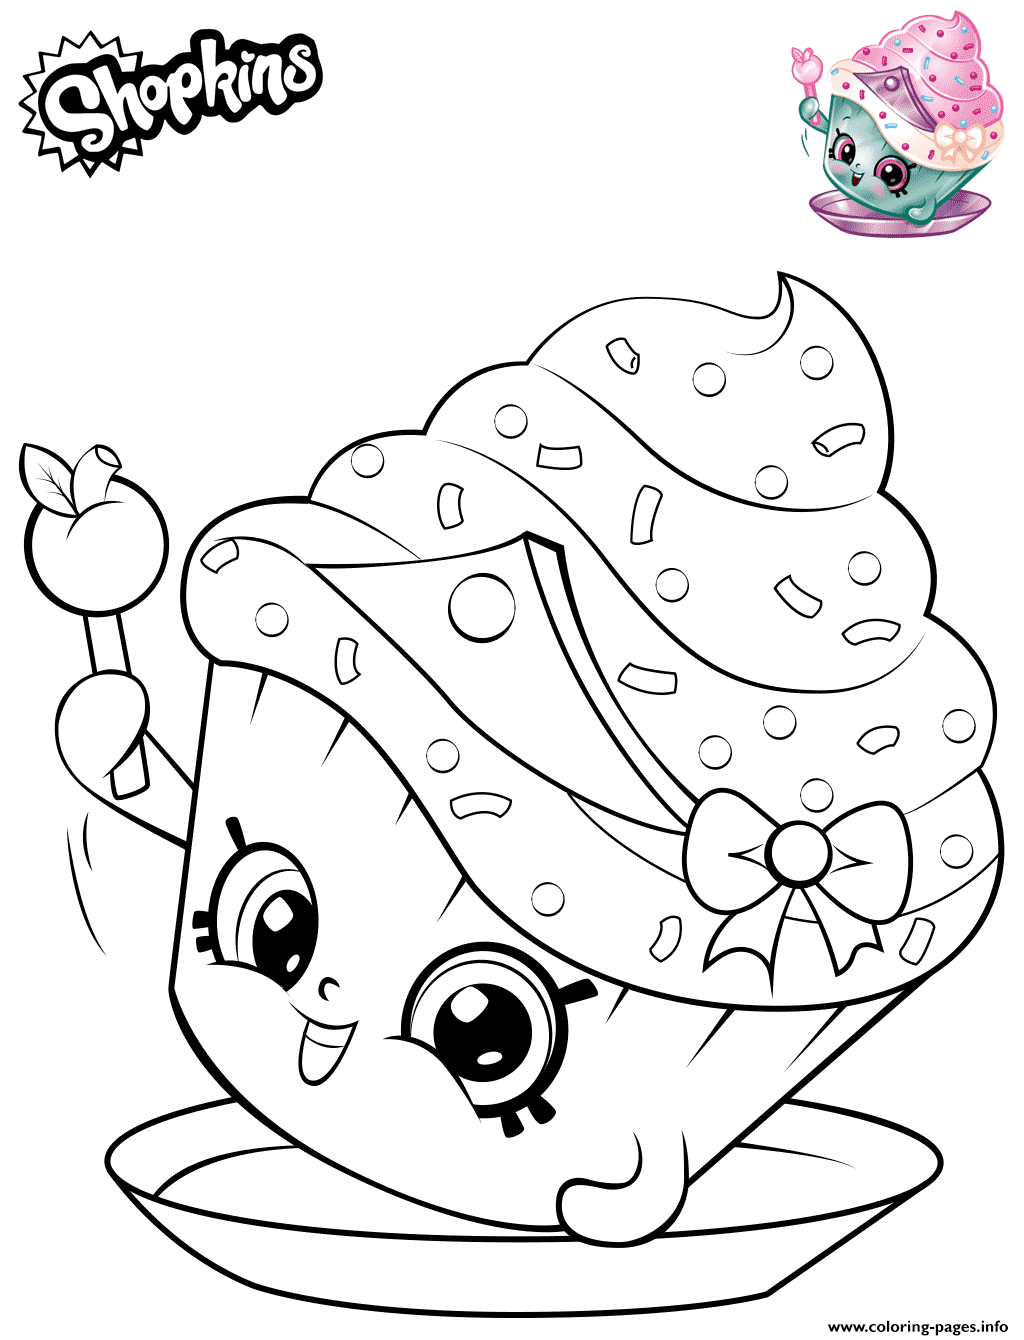 Butterbean Cafe - Free Coloring Pages